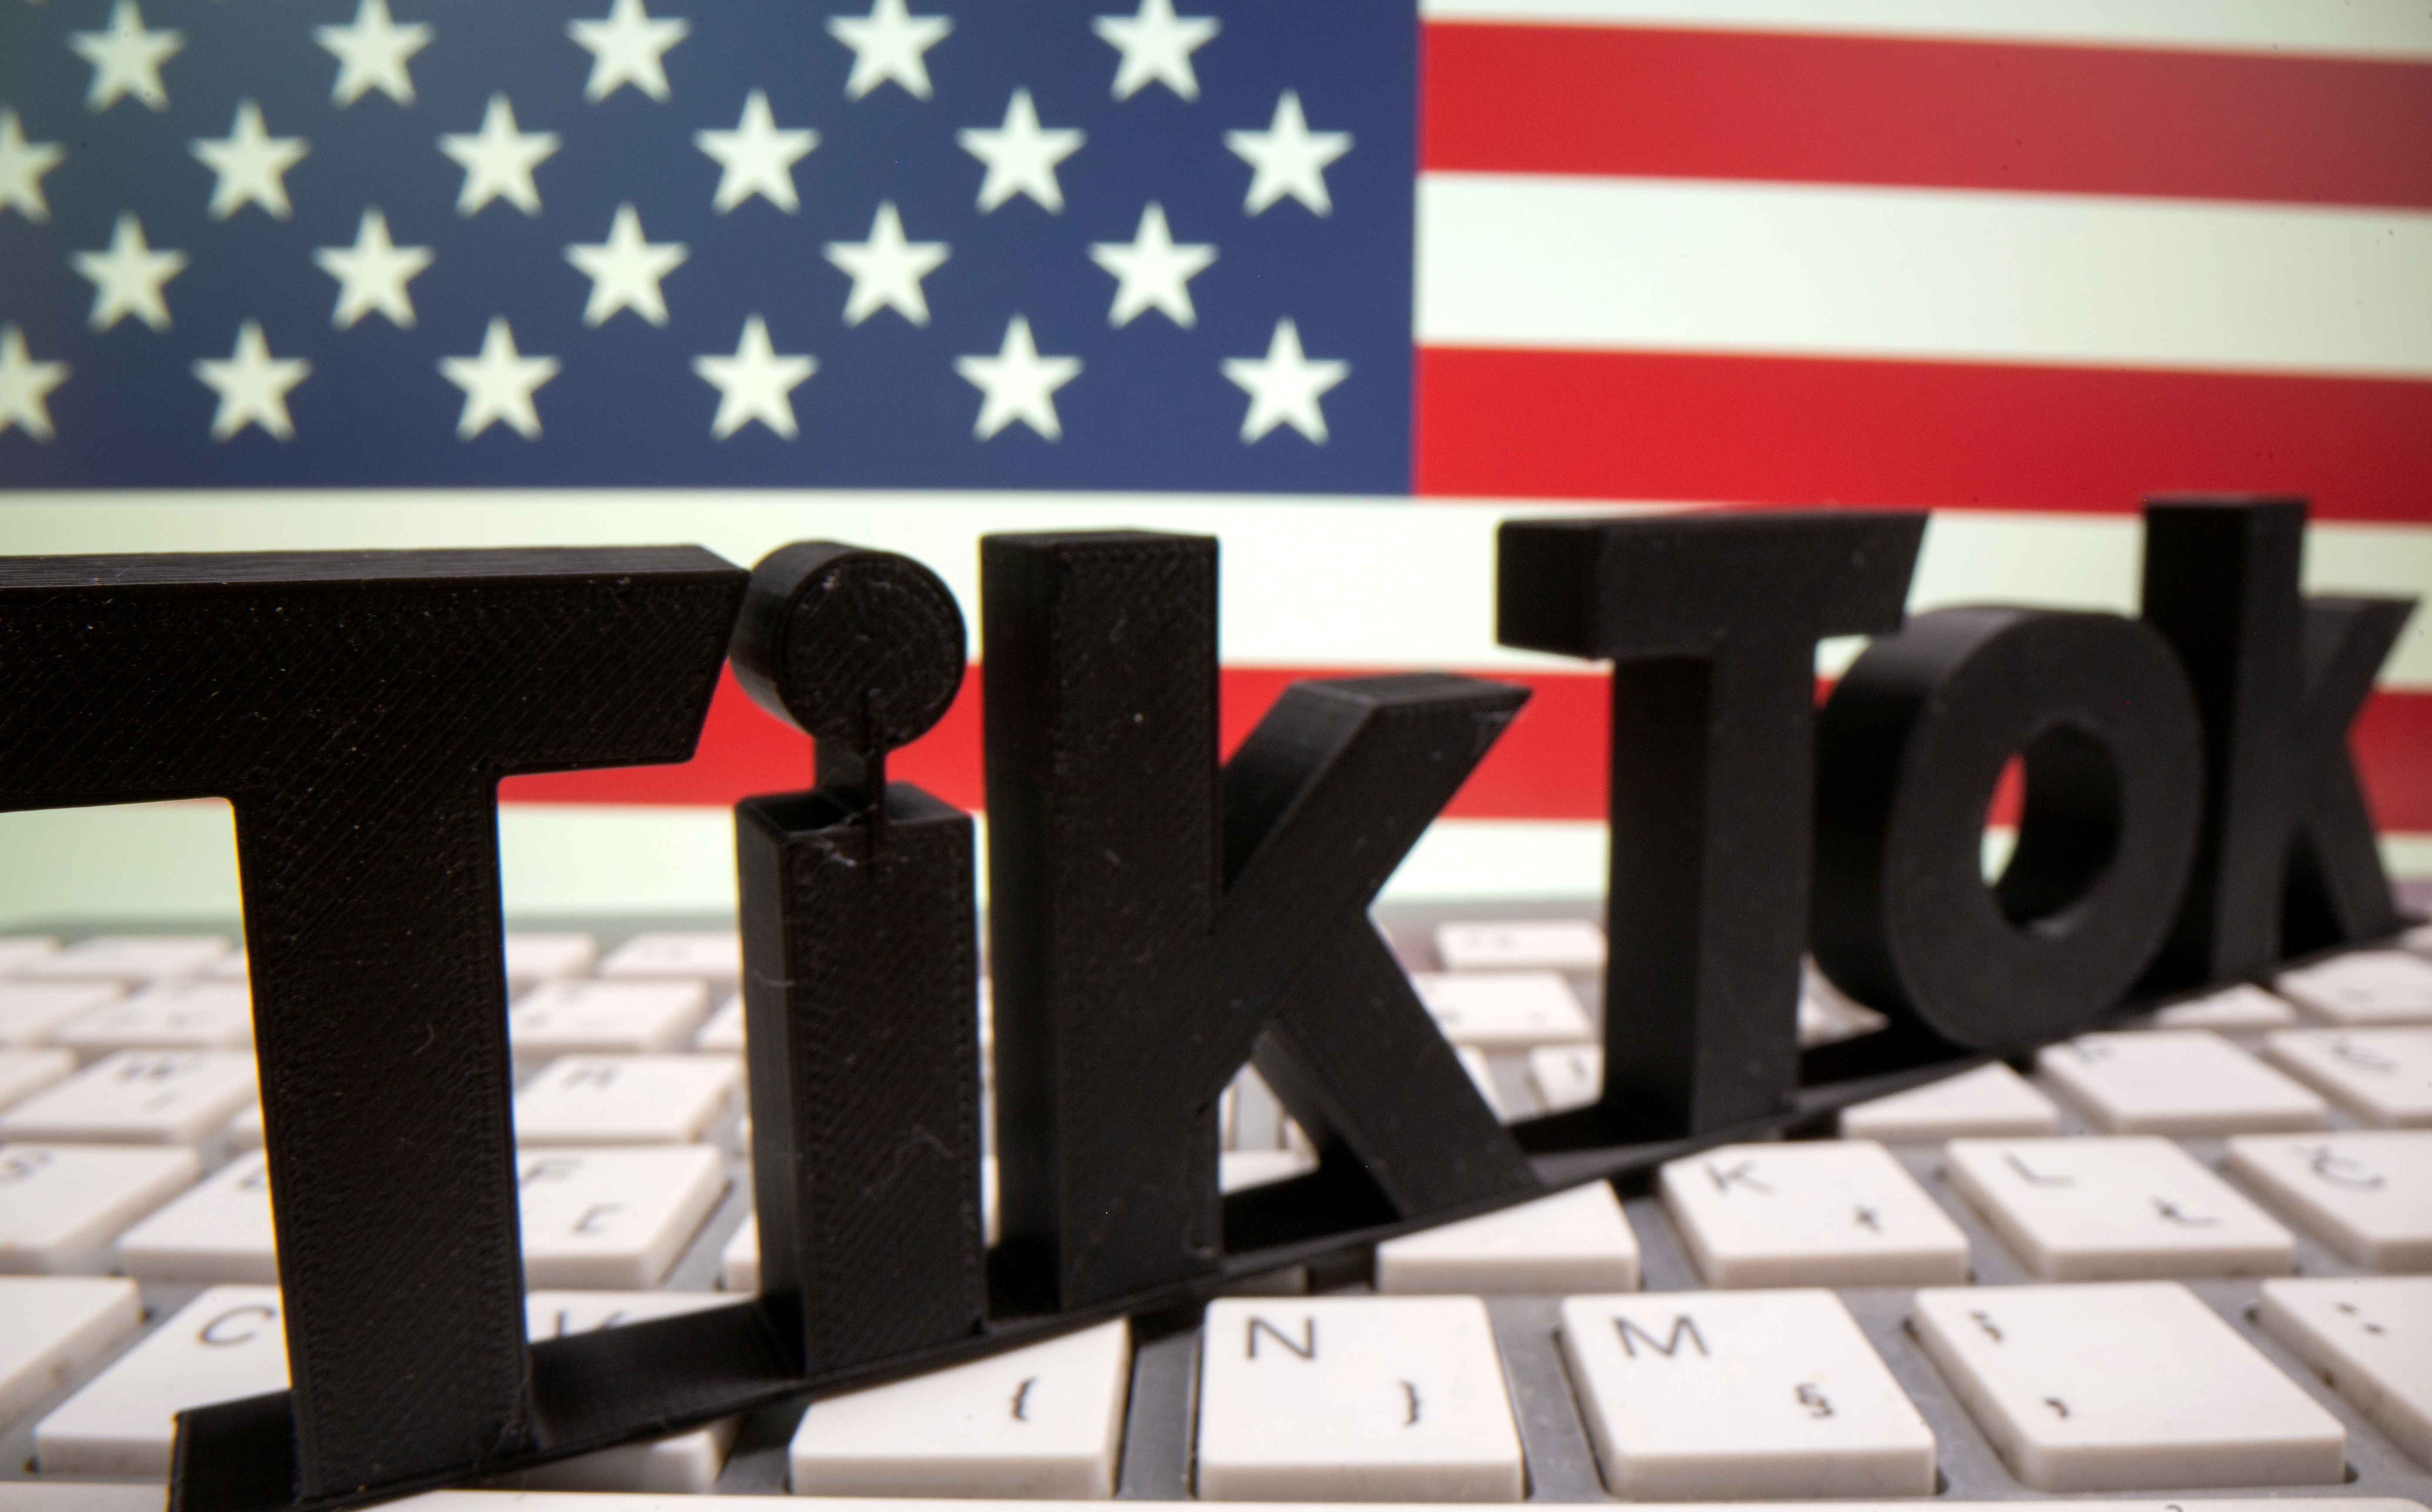 A 3D printed Tik Tok logo is placed on a keyboard in front of U.S. flag in this illustration taken October 6, 2020. Picture taken October 6, 2020. REUTERS/Dado Ruvic/Illustration